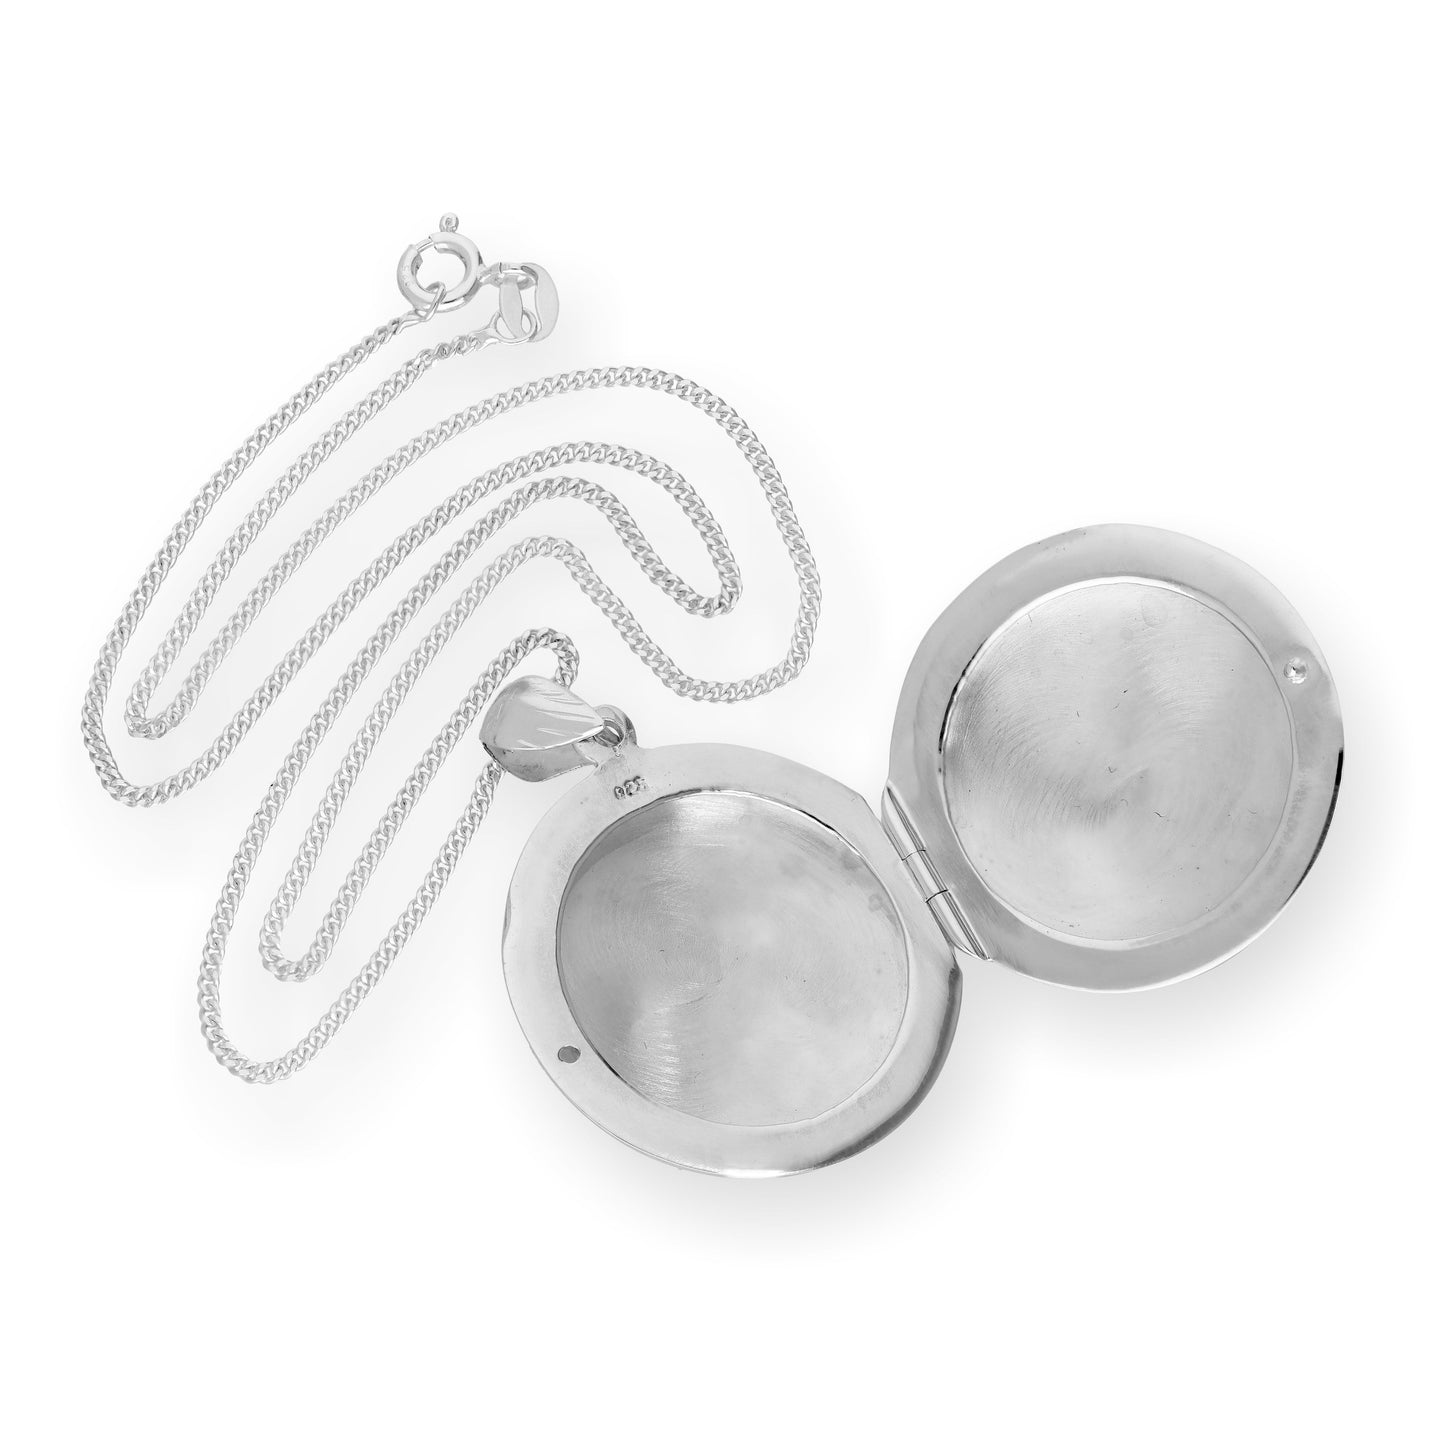 Large Sterling Silver Engraved Round Locket on Chain 16 - 24 Inches